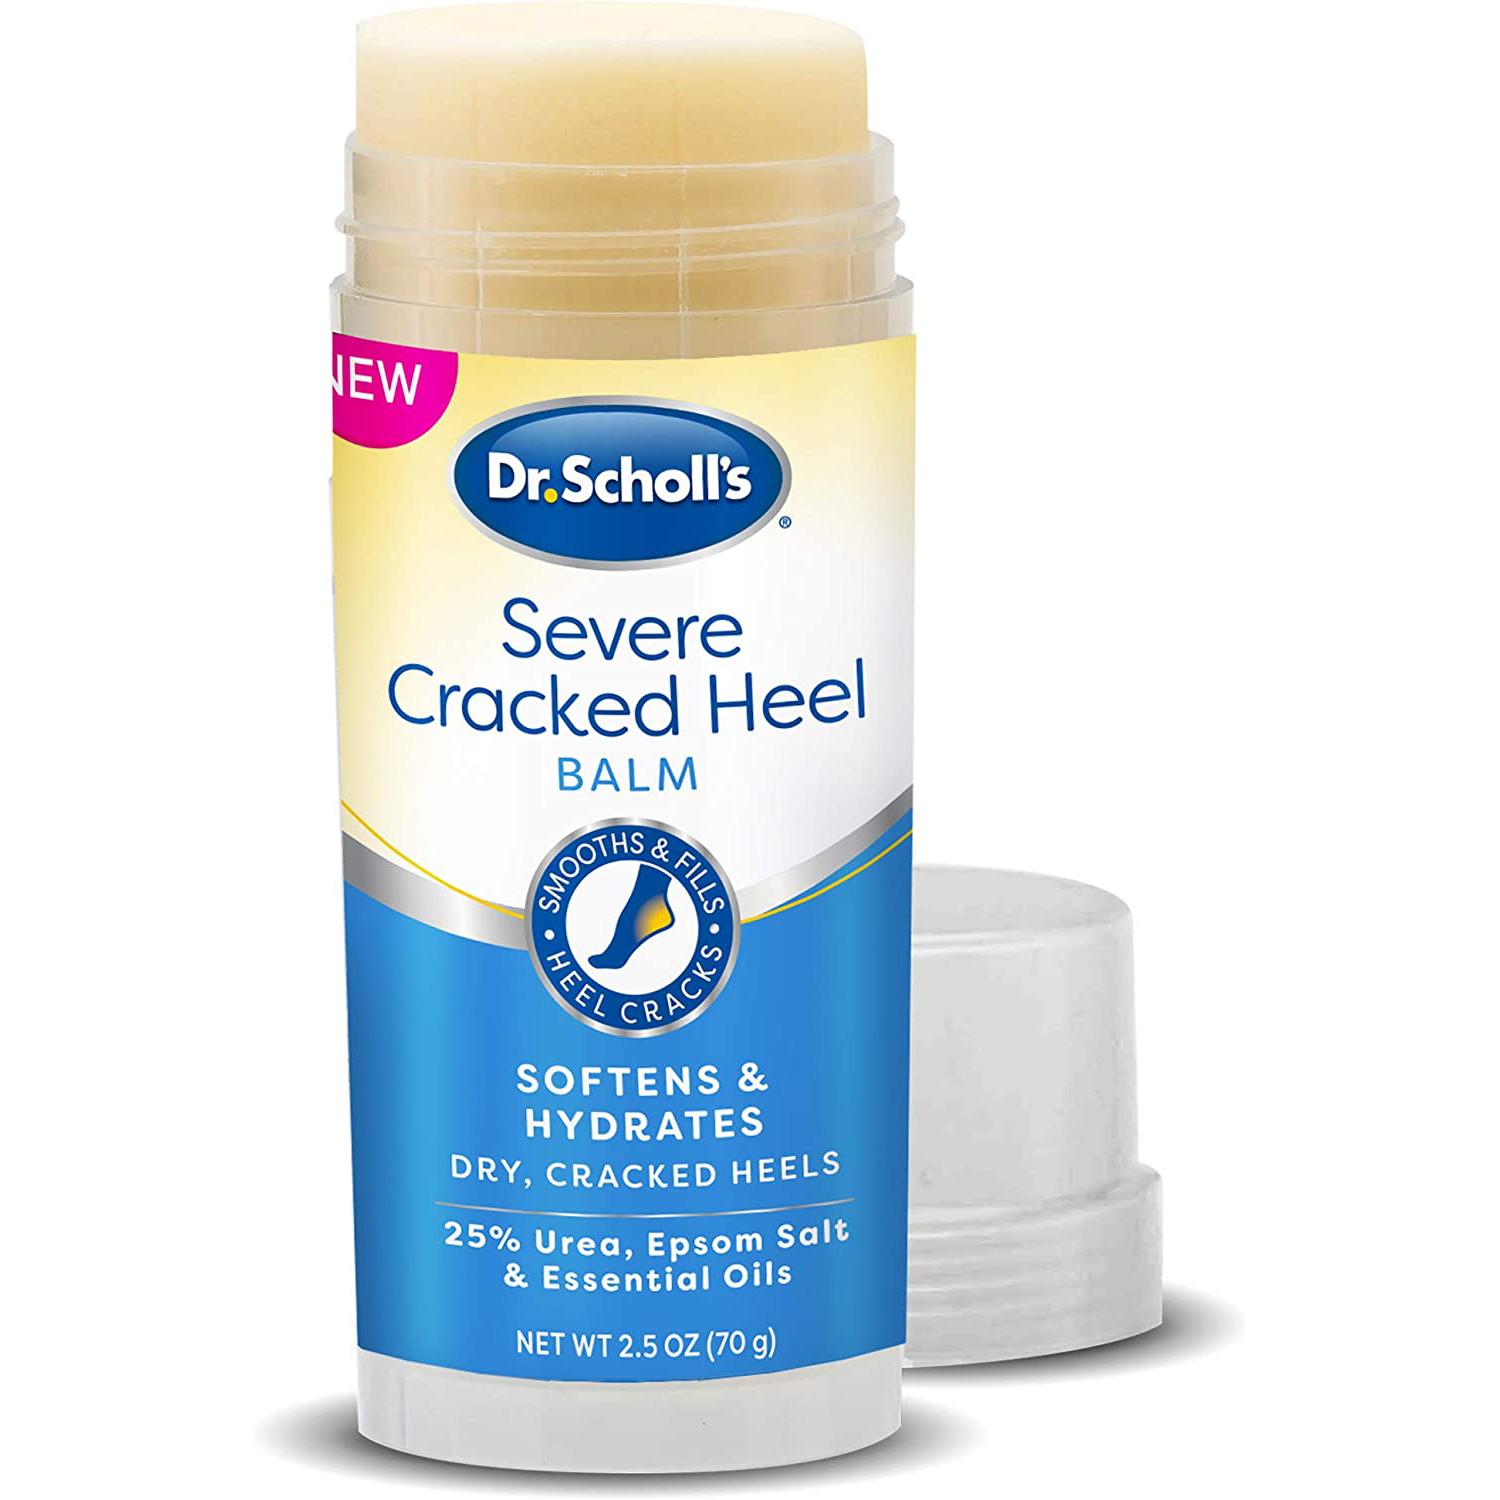 Dr Scholls Severe Cracked Heel Repair Balm for $4.70 Shipped